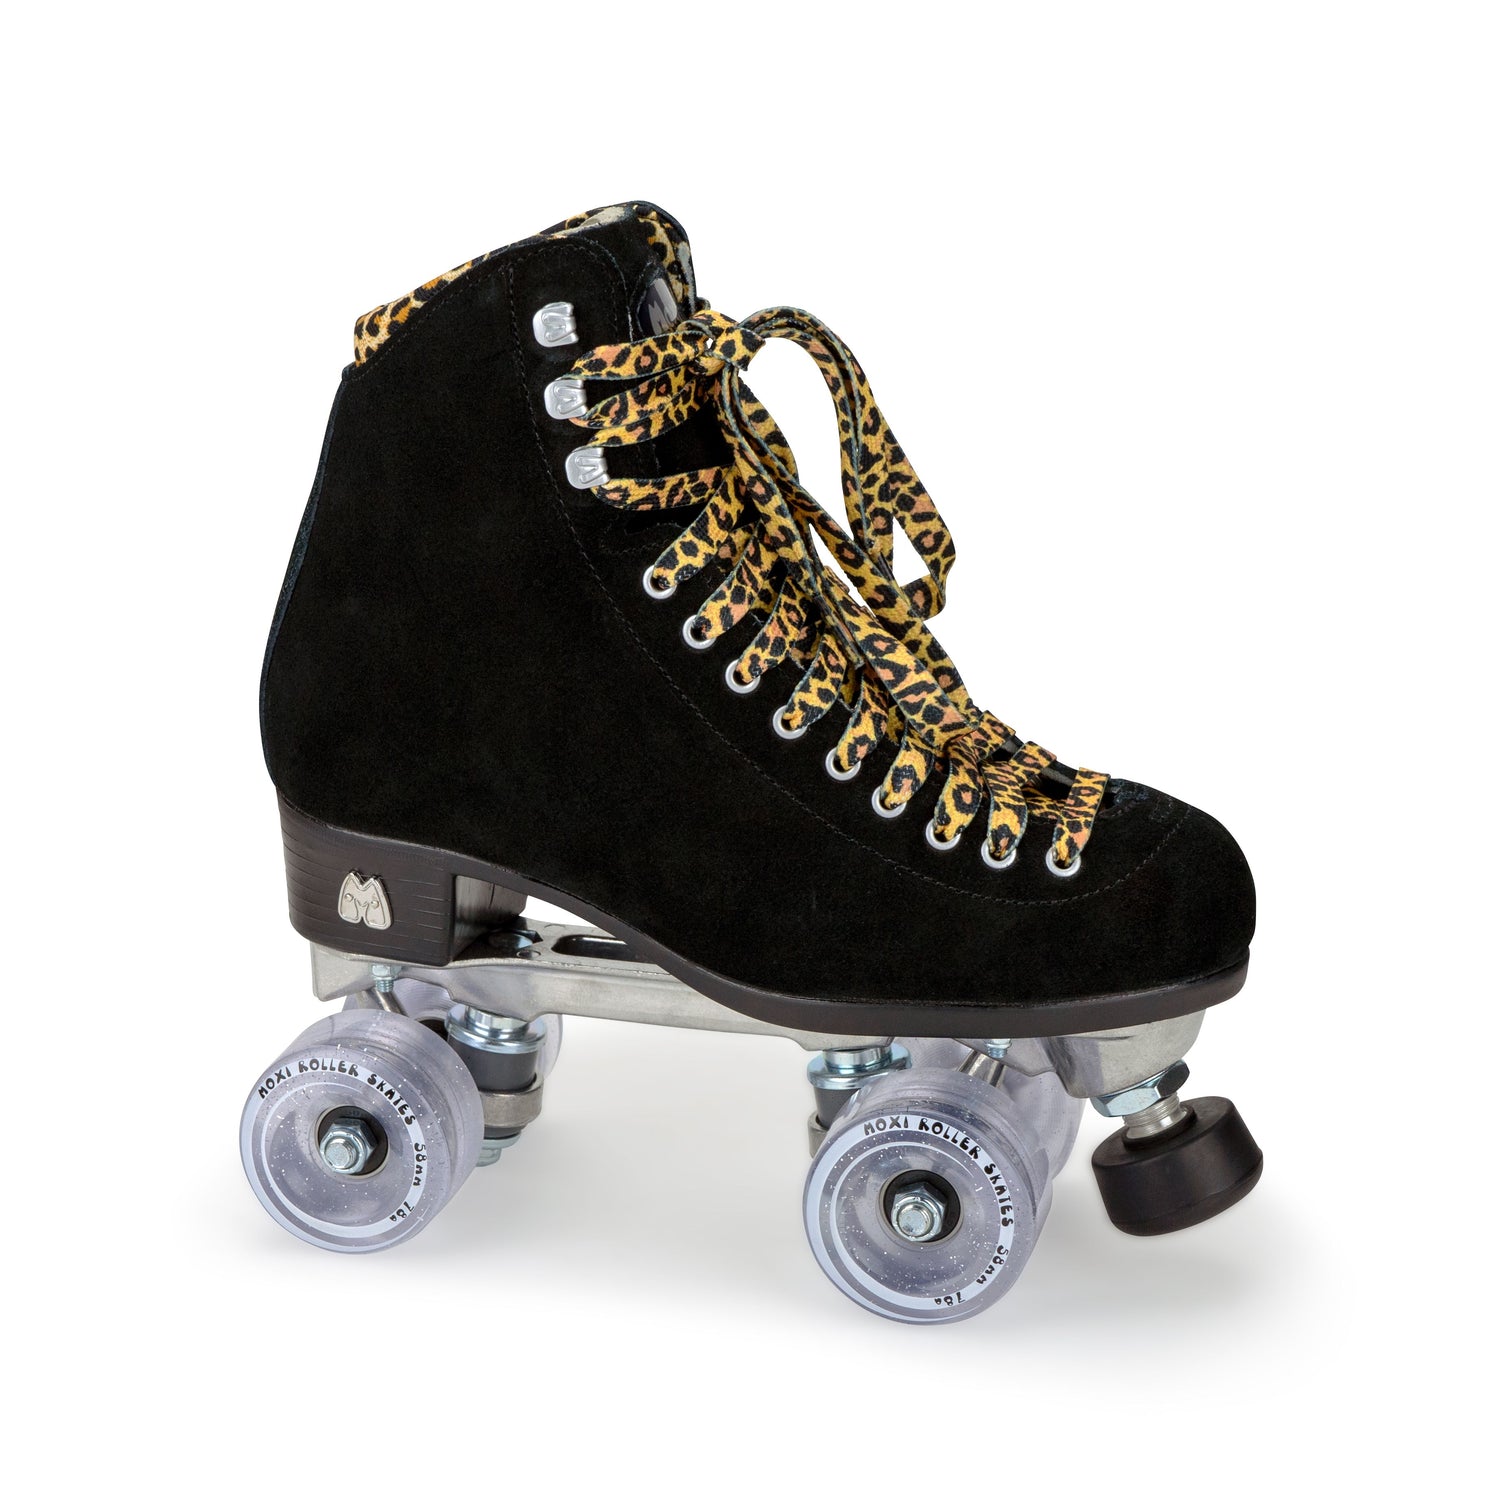 Come to Fresa's Roller Skate shop in Las Vegas and get your Moxi skates Panther.   These Black/Leopard Moxi Skate panther are ready for outdoor skating.  Cruise around Las Vegas Art District or come and skate in our indoor skate ramp. Fresa's Roller Skate Shop the one skate shop in Las Vegas.  We build custome shoe roller skate, roller Skate Classes and Roller Blade classes.